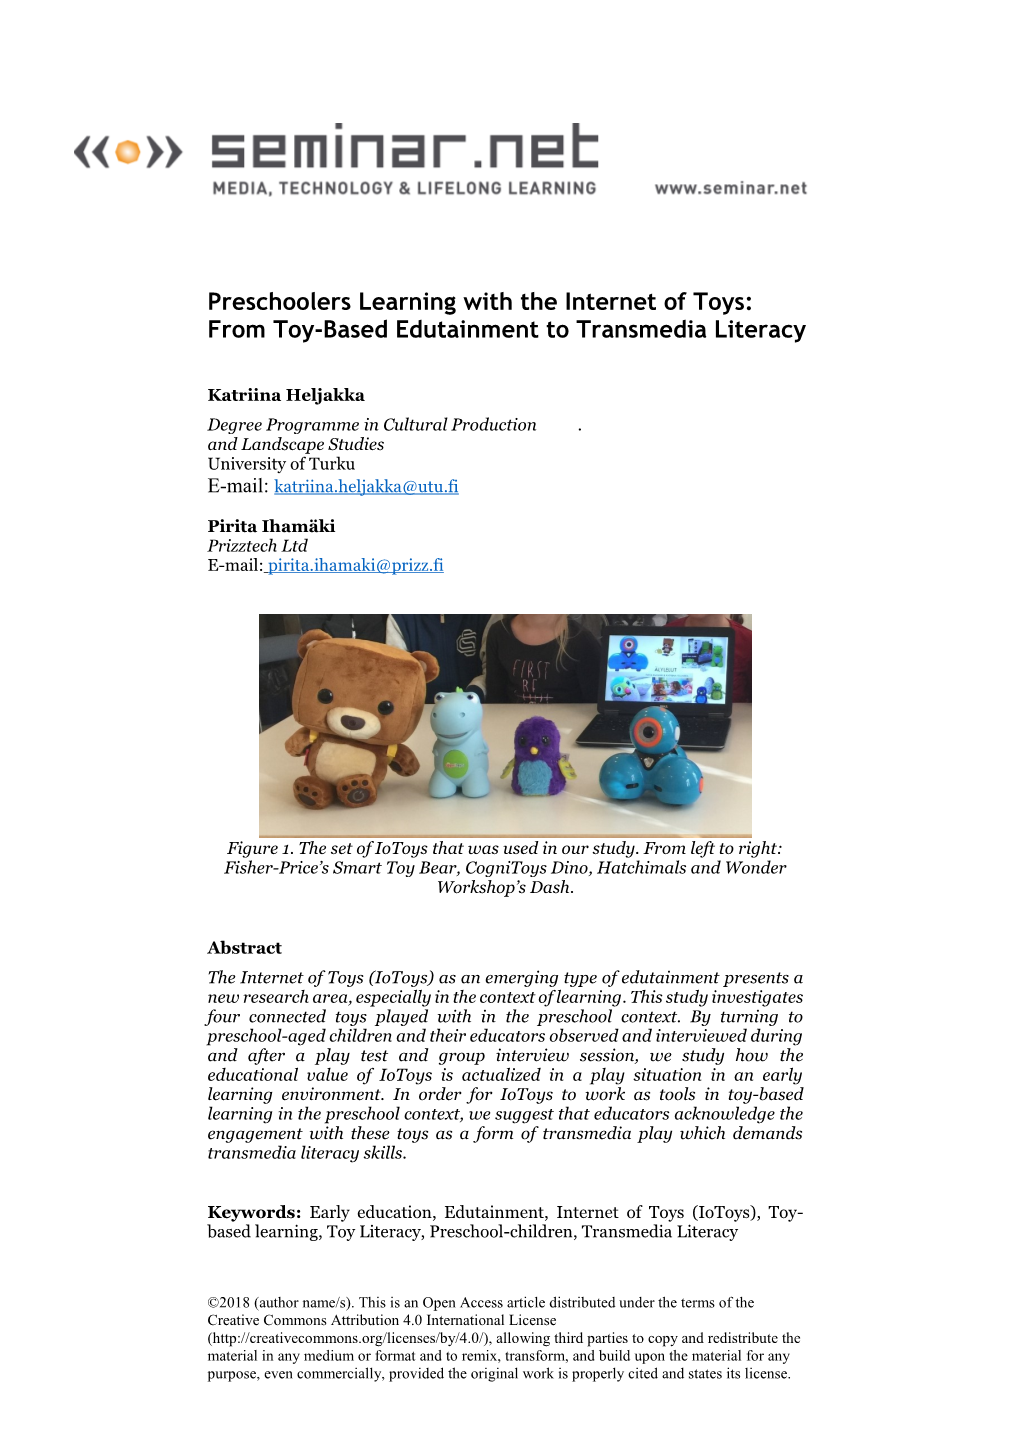 Preschoolers Learning with the Internet of Toys: from Toy-Based Edutainment to Transmedia Literacy